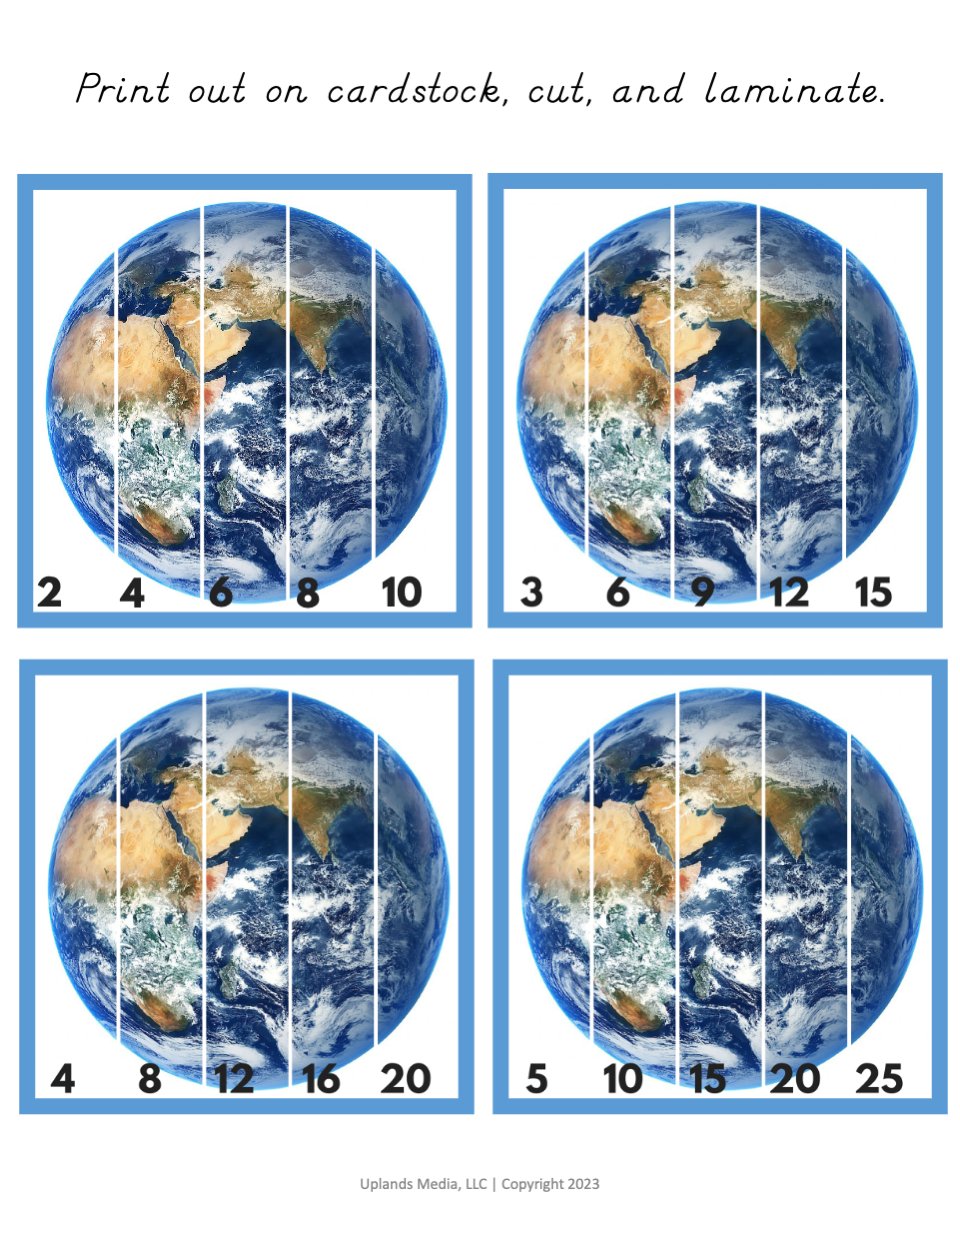 [Math] Skip Counting Puzzles - Earth Day - Printables by Carrots Are Orange